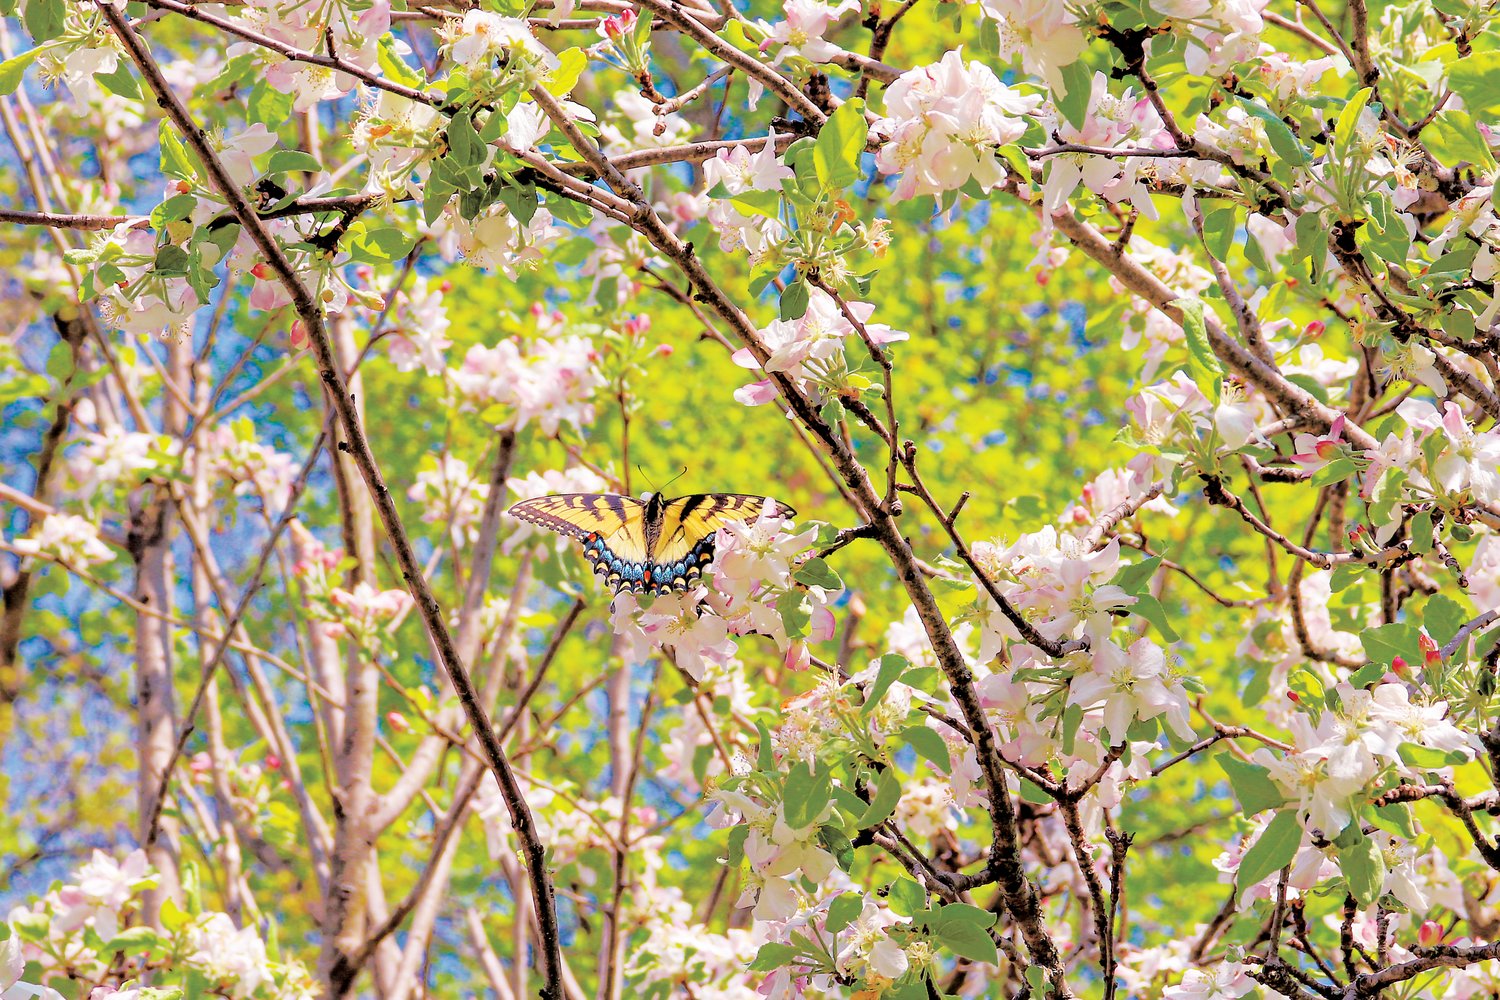 CN+R photographer Simon Barbre captured this butterfly in spring splendor near his home in Staley.